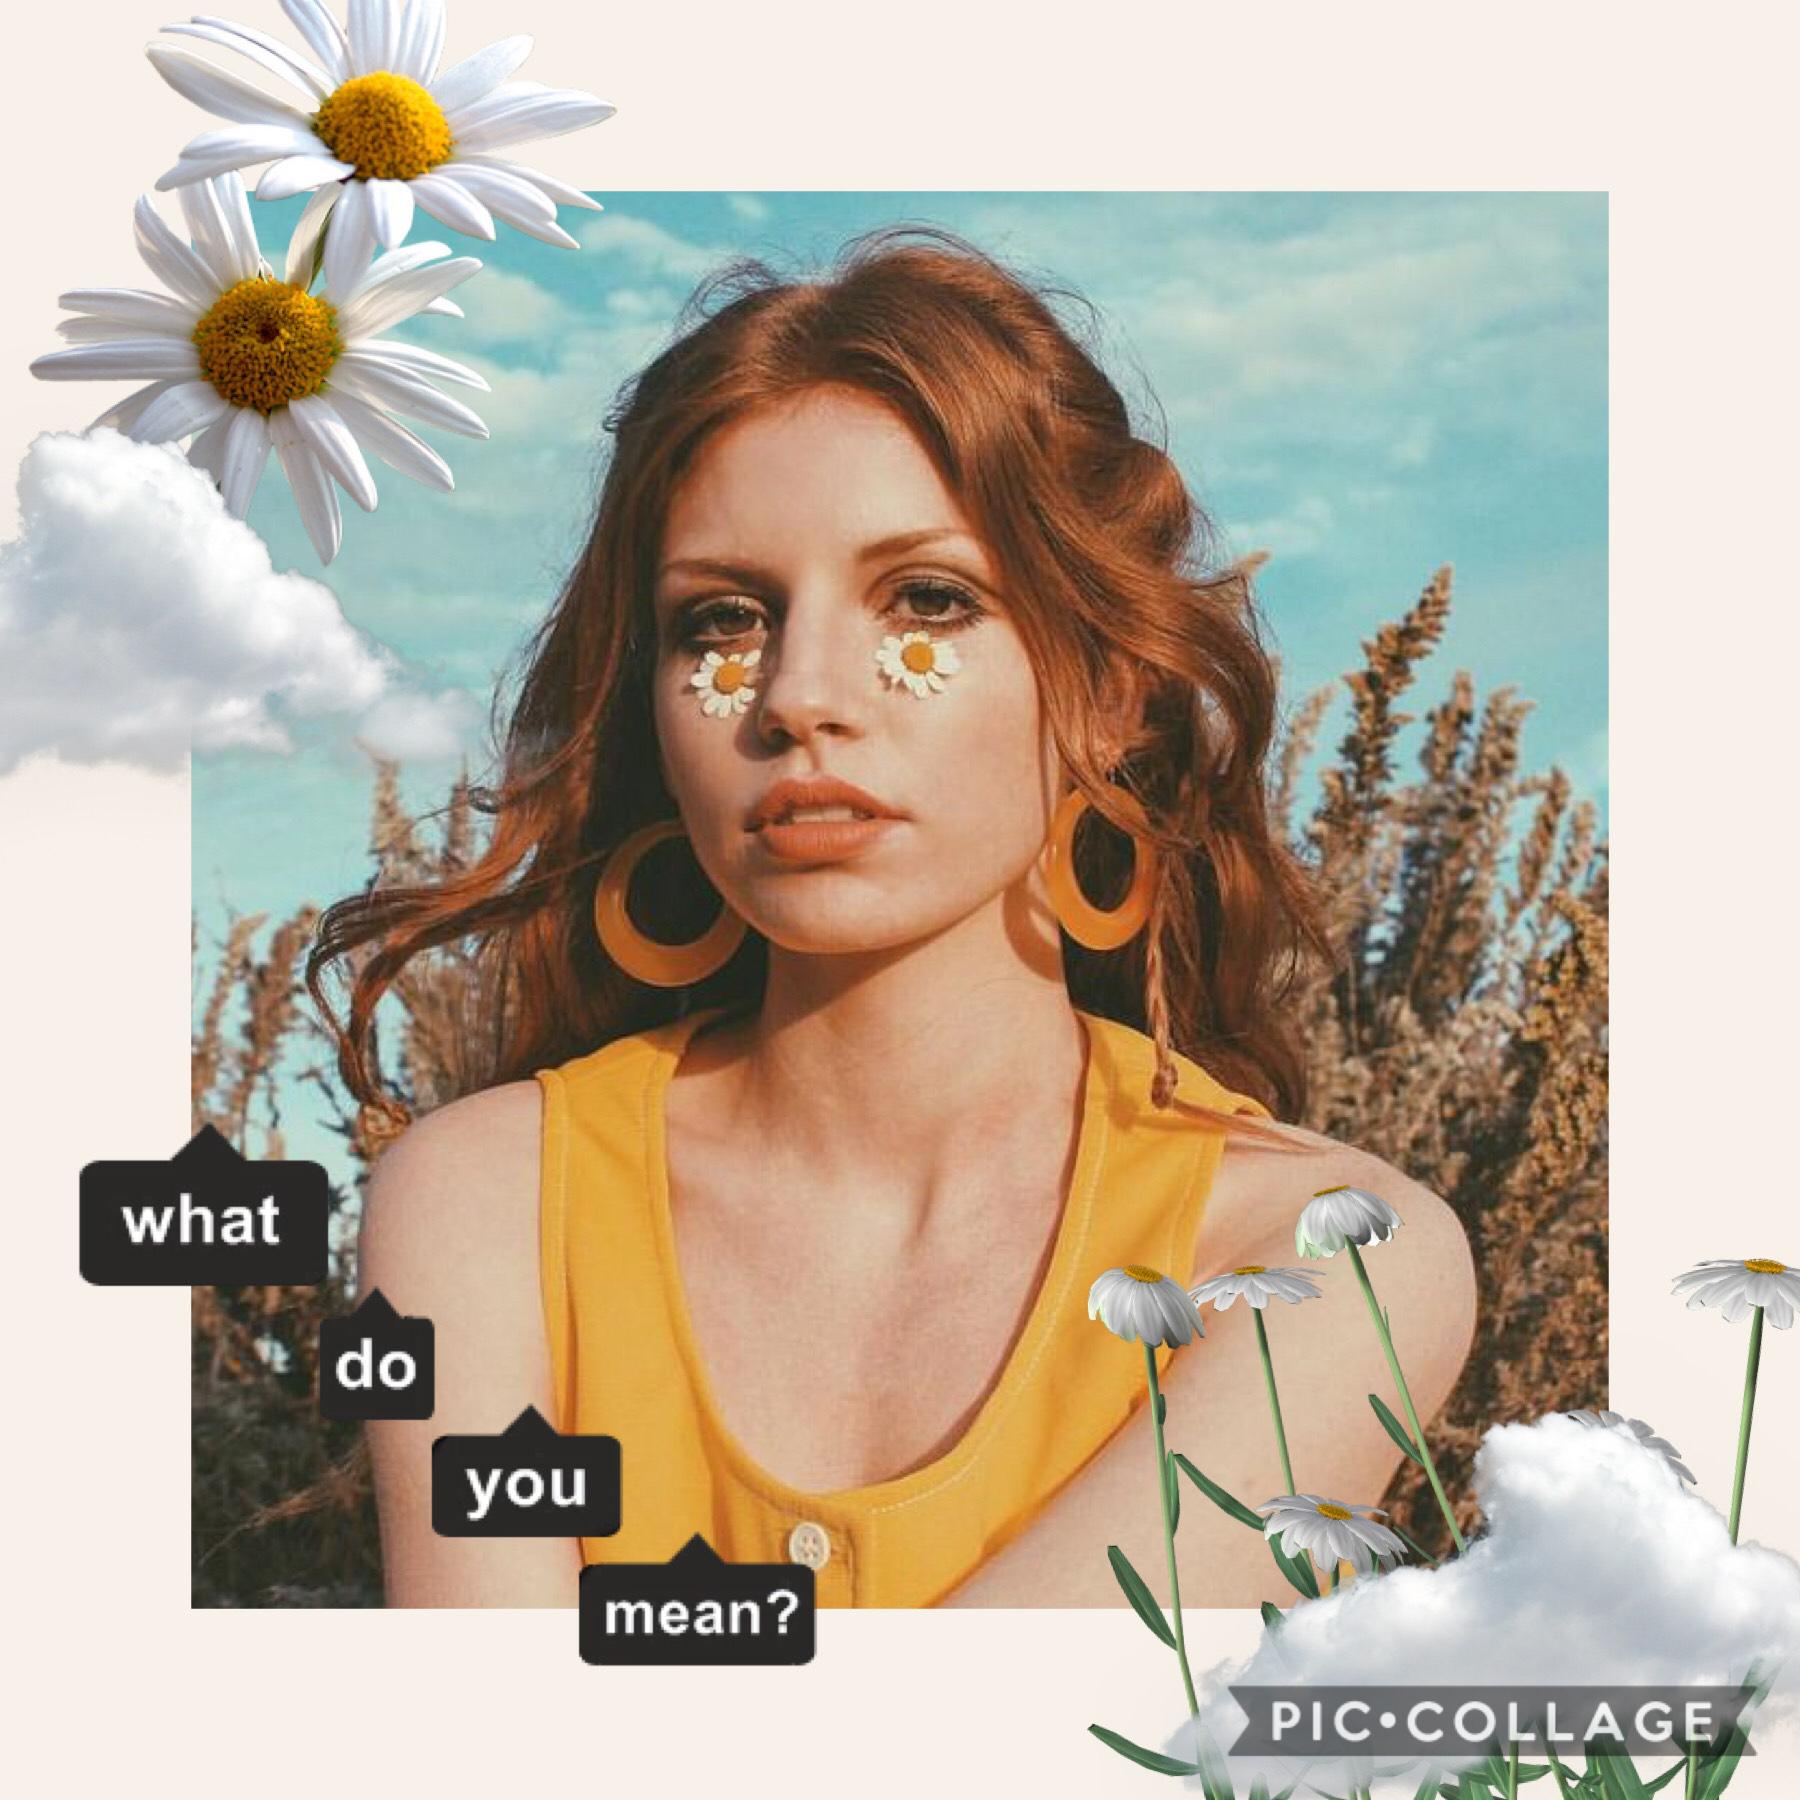 t a p

🌼d a s i e s 🌼

This one was really quick but I decided to post it anyway seen as it fit my theme 💫💕